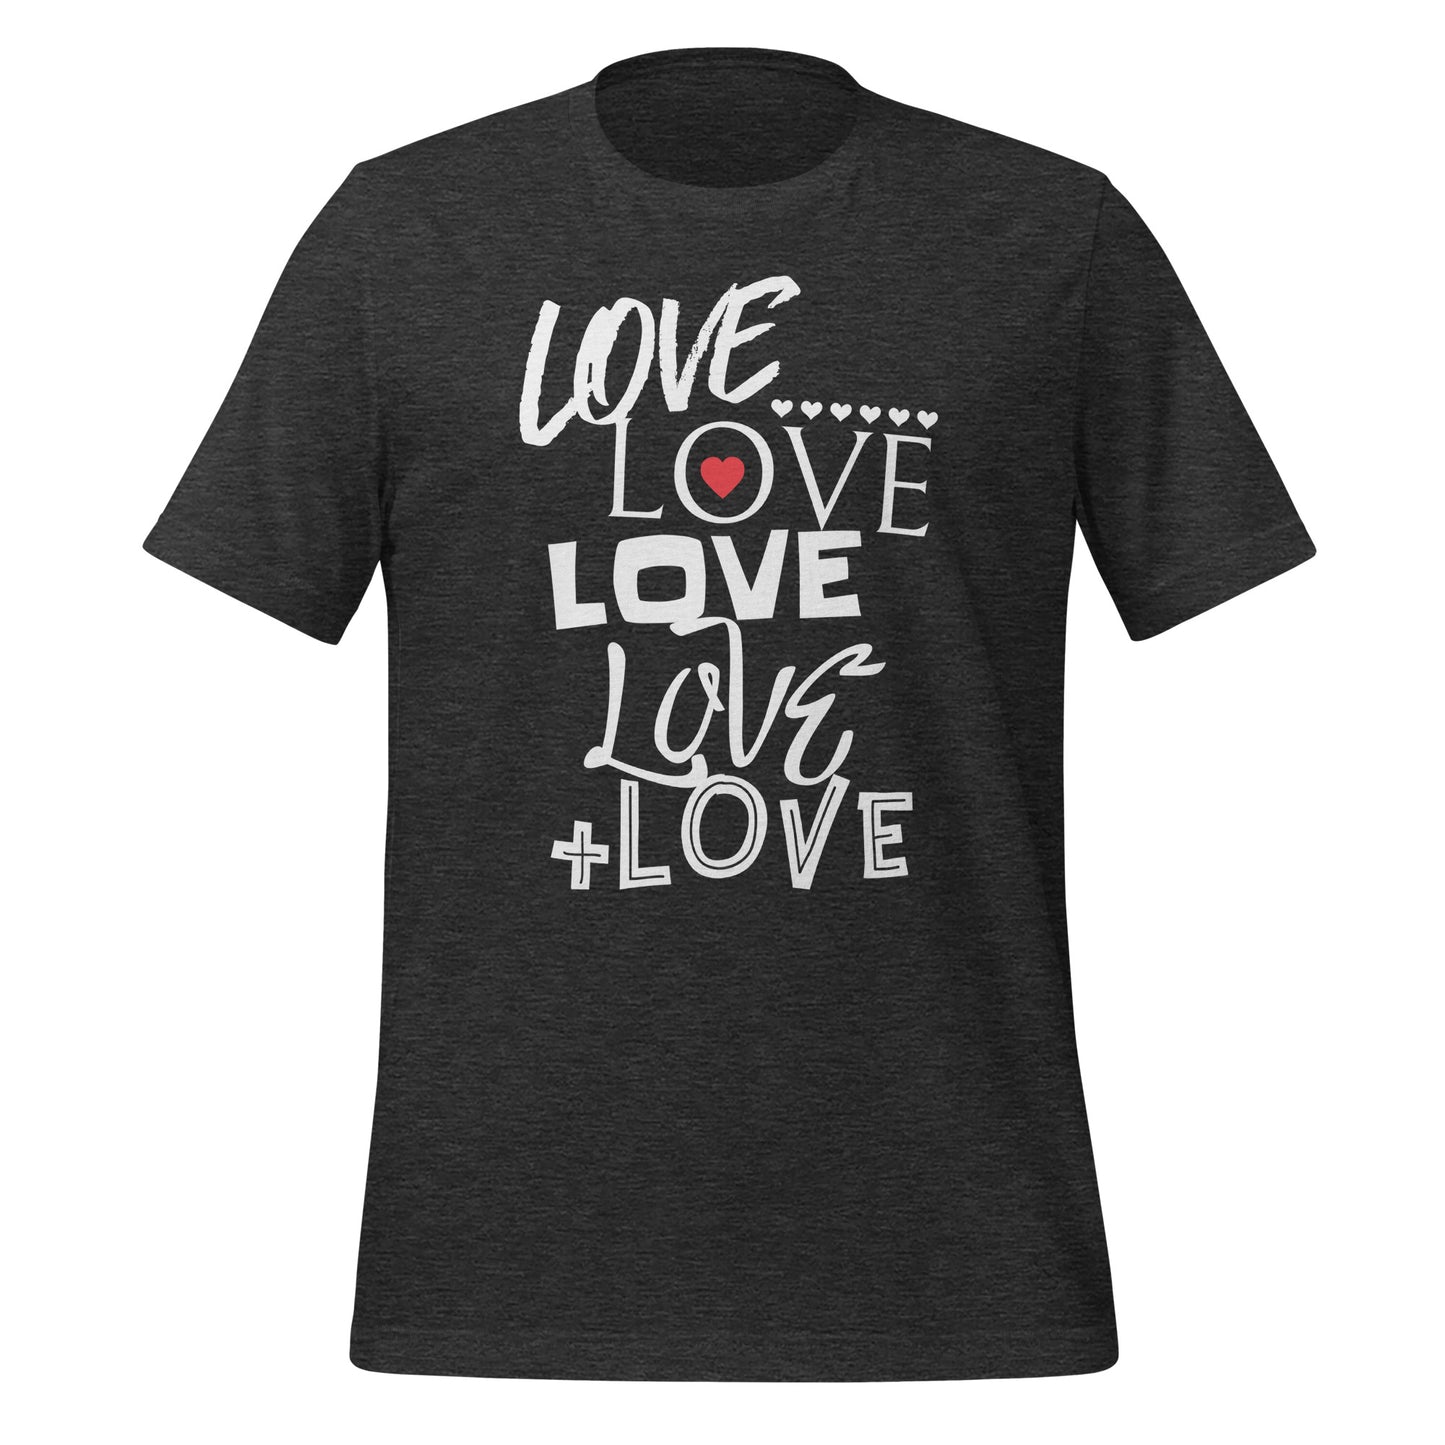 Lots of LOVE Adult T-shirt